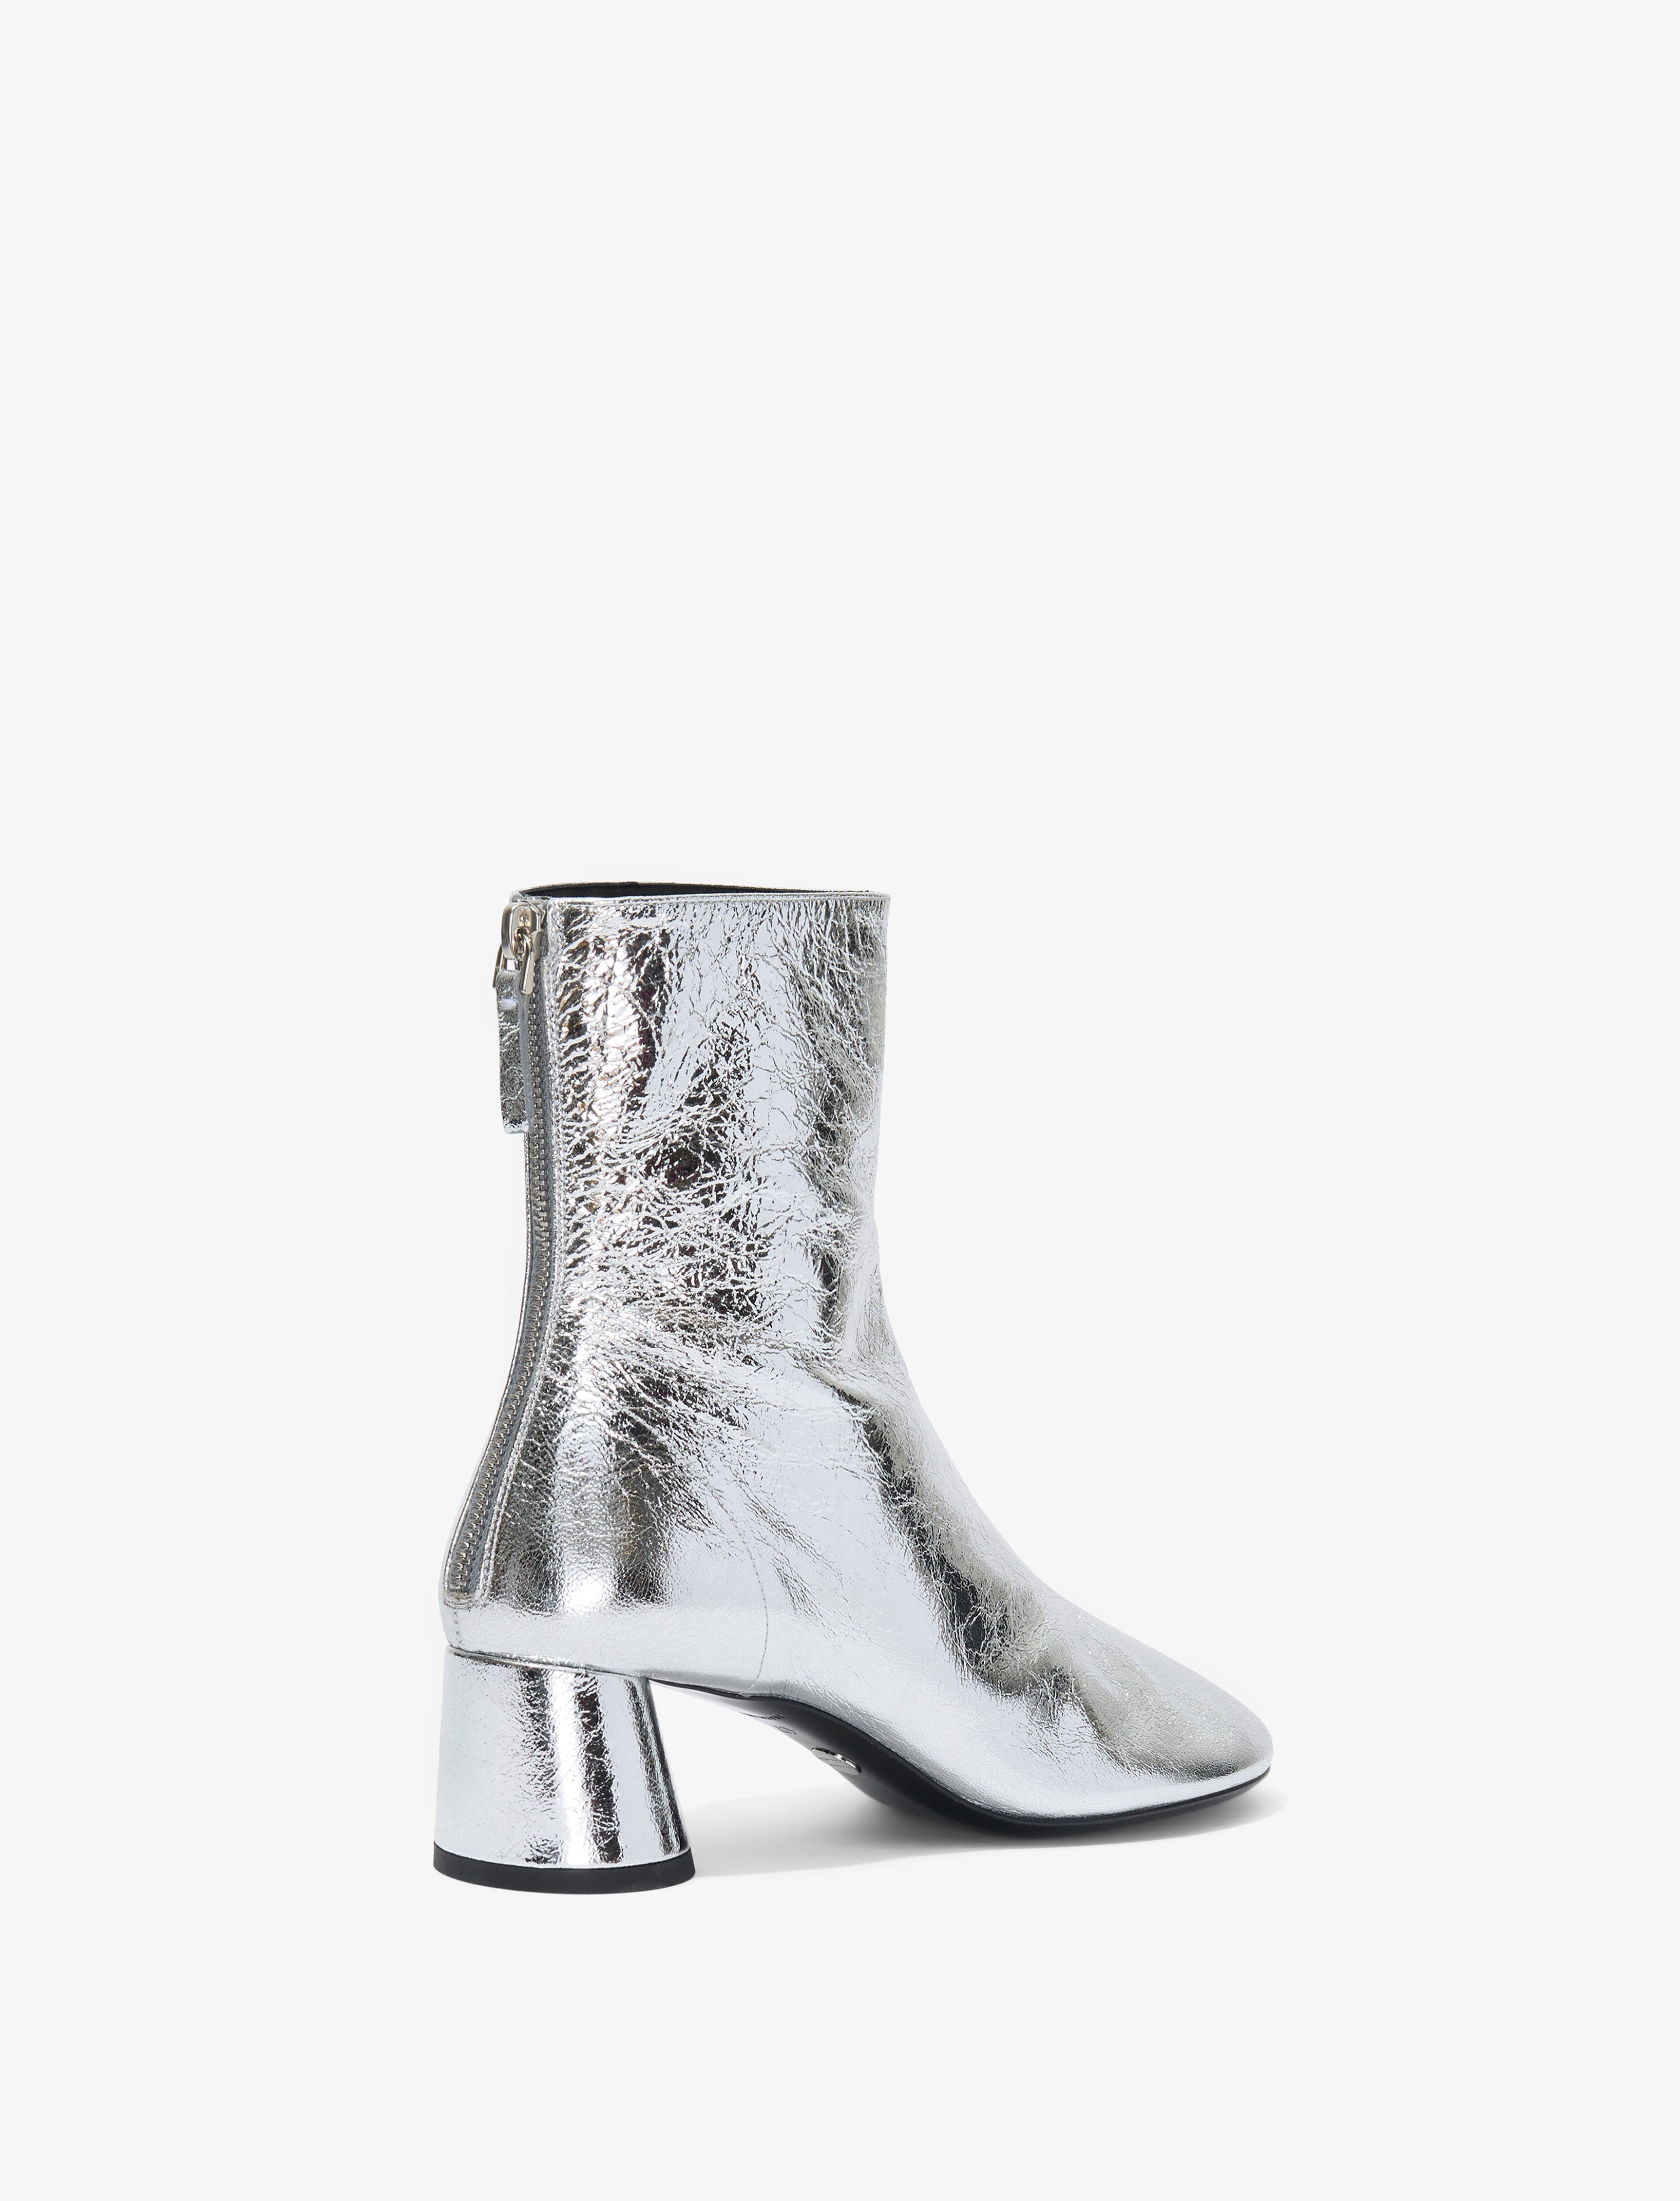 Glove Boots in Crinkled Metallic - 3